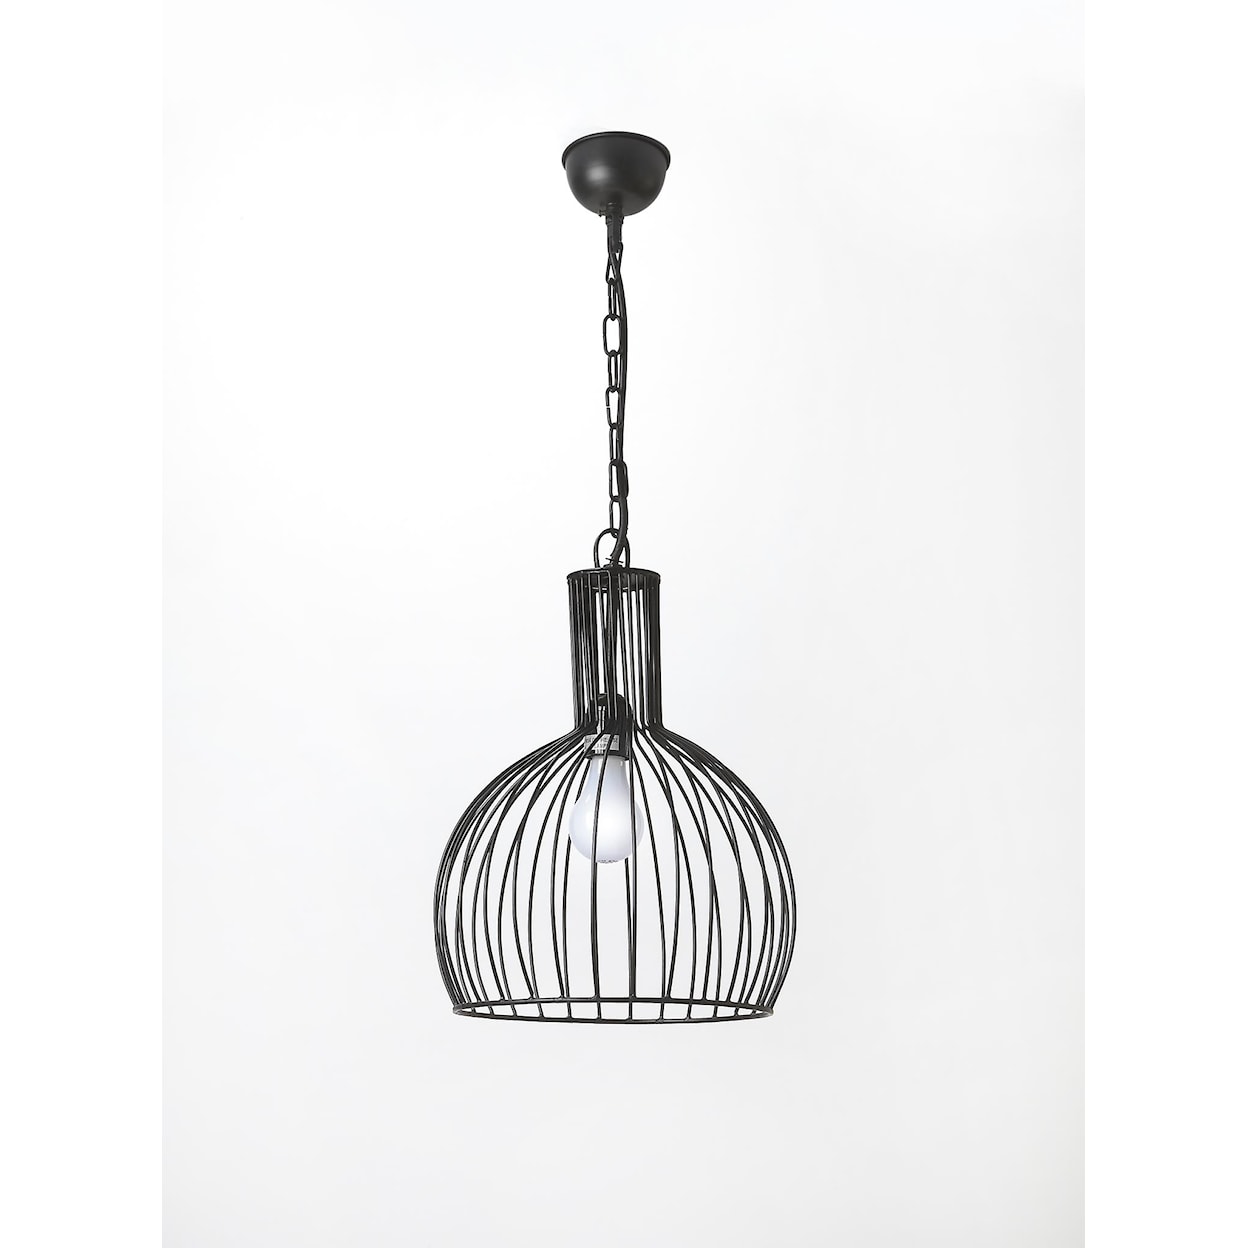 Butler Specialty Company Hors D'oeuvres 1 Light Pendant